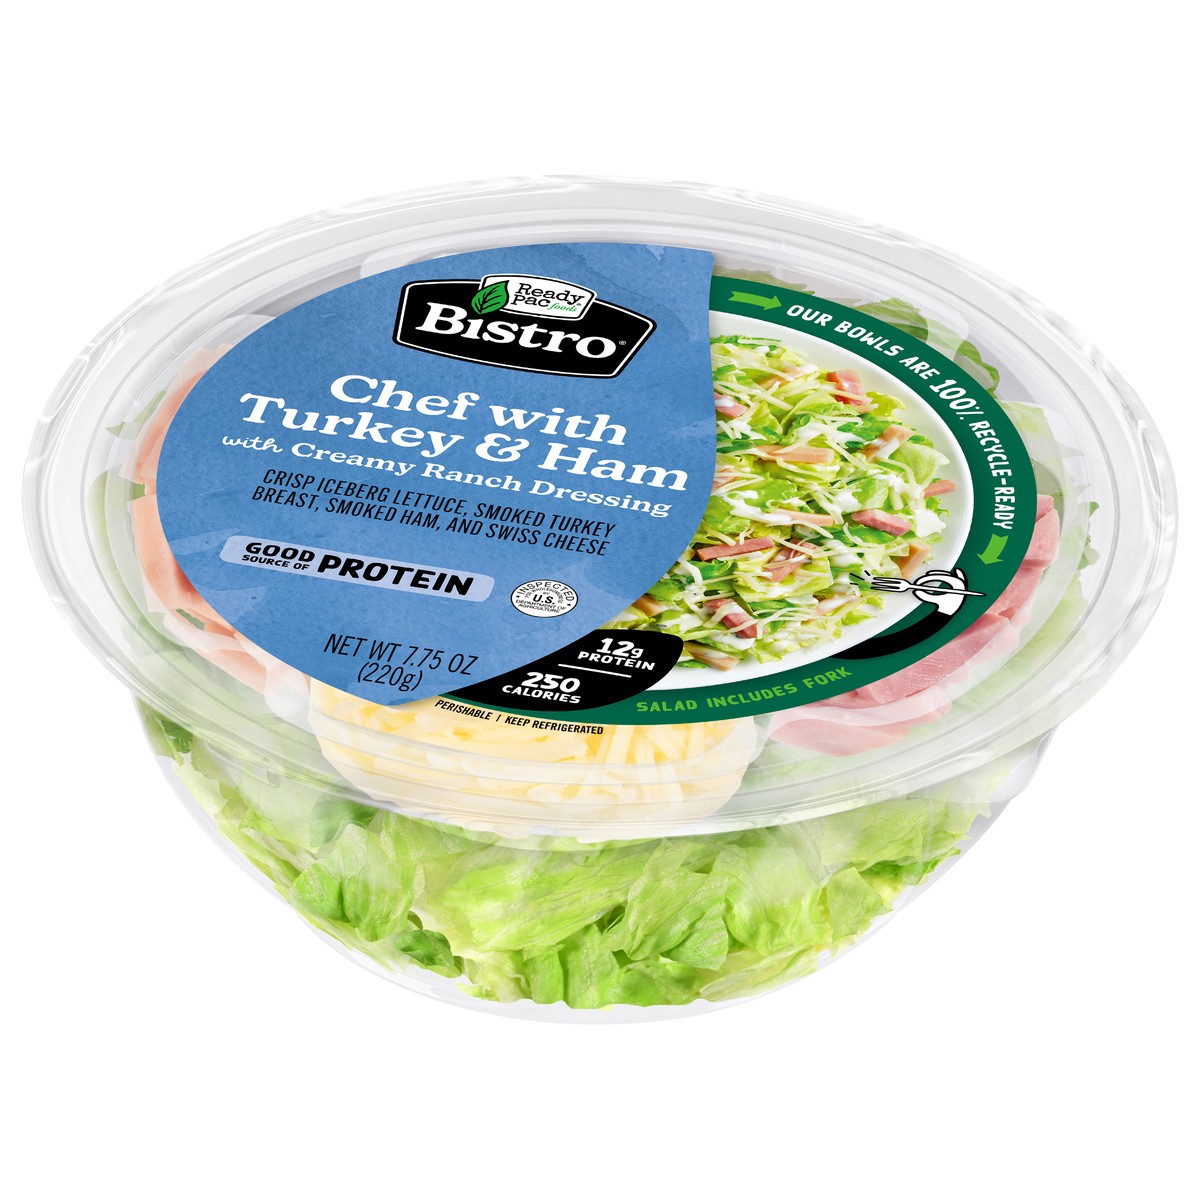 slide 12 of 13, Ready Pac Foods Bistro Chef with Turkey & Ham Salad with Creamy Ranch Dressing 7.75 oz, 7.75 oz